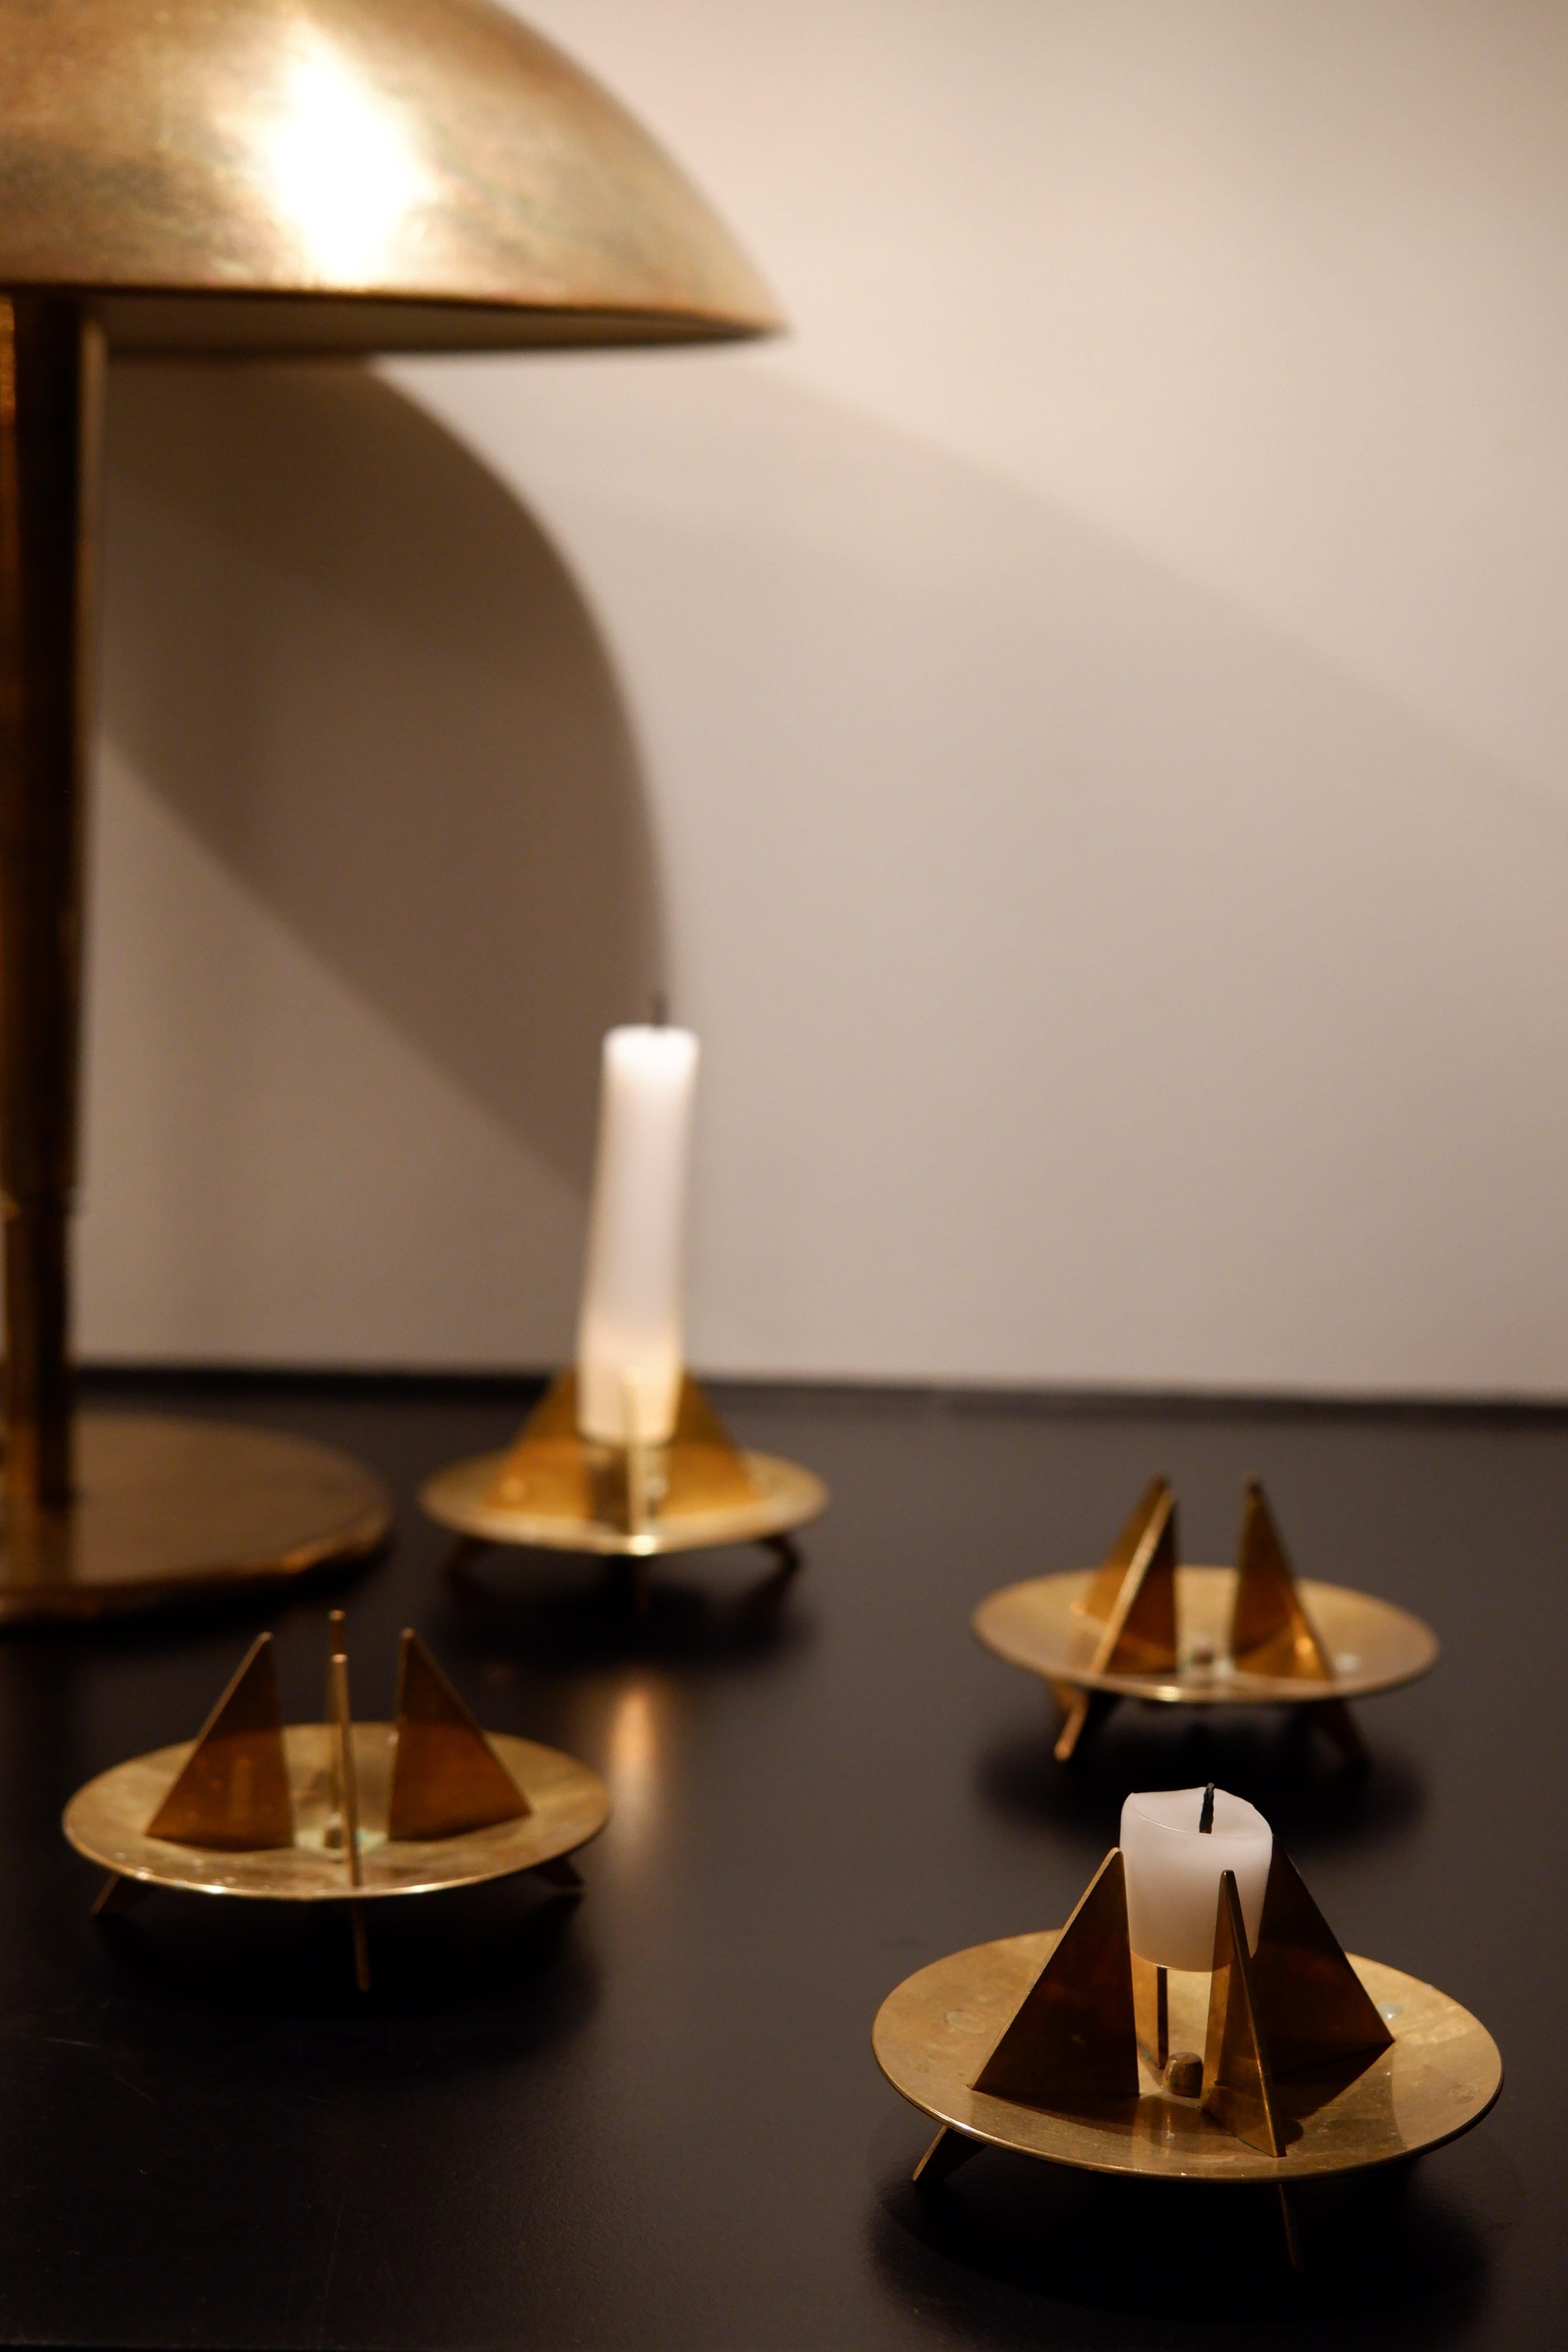 Set of 4 modernist and scultptural candleholders designed by Pierre Forsell. These candleholders are made in full brass. Model number 20 produced by Skultuna. Each item is stamp by the editor. Dimensions : H: 6cm / L: 10 cm.